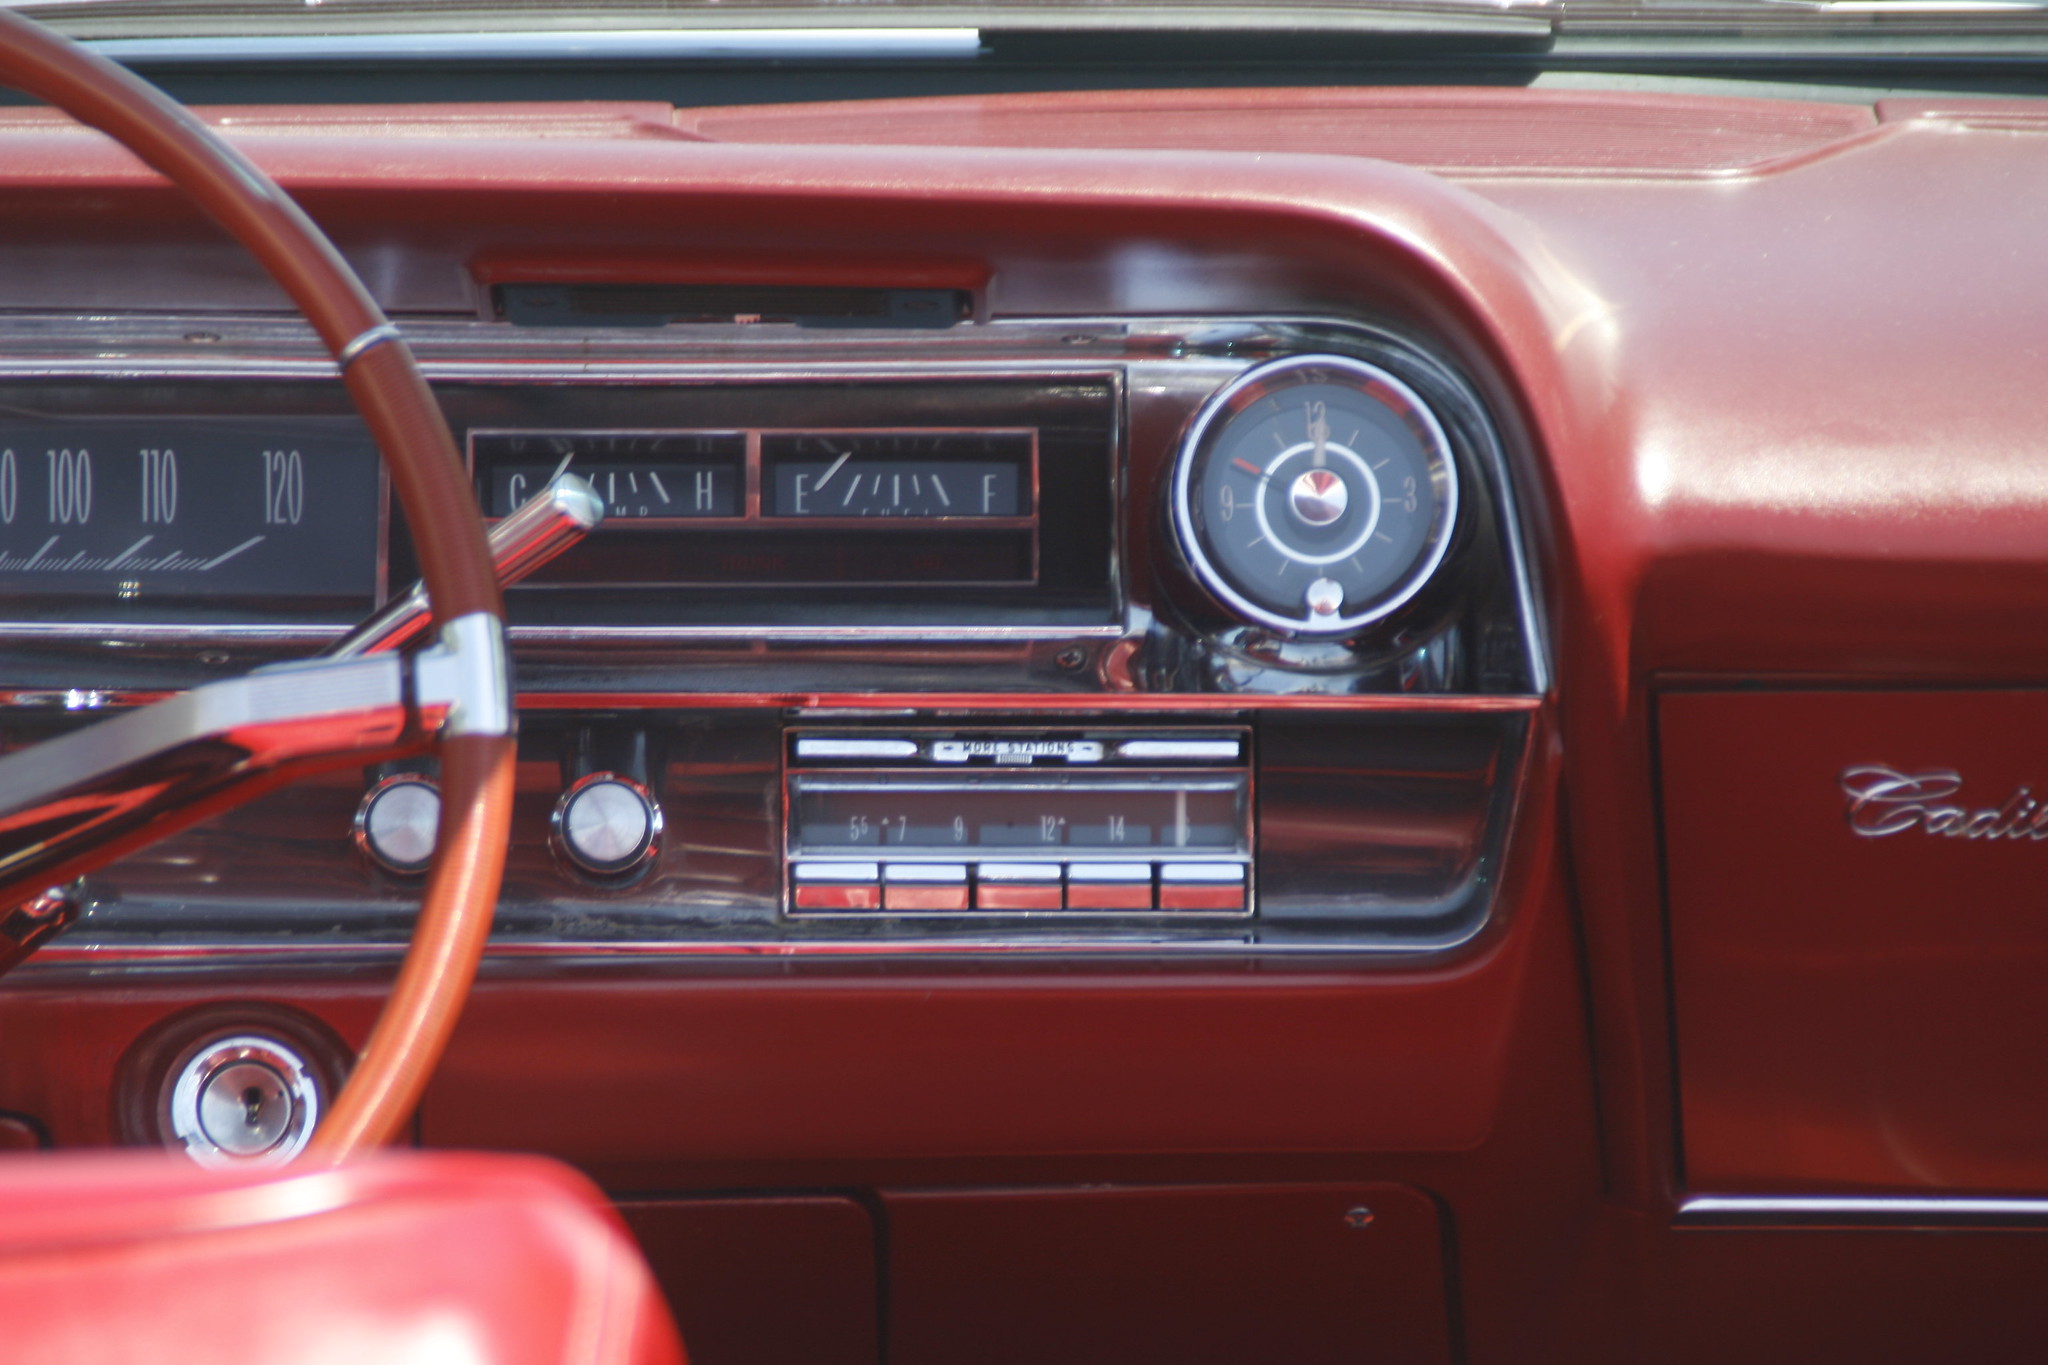 Ask Hackaday: Will Your 2030 Car Have AM Radio?